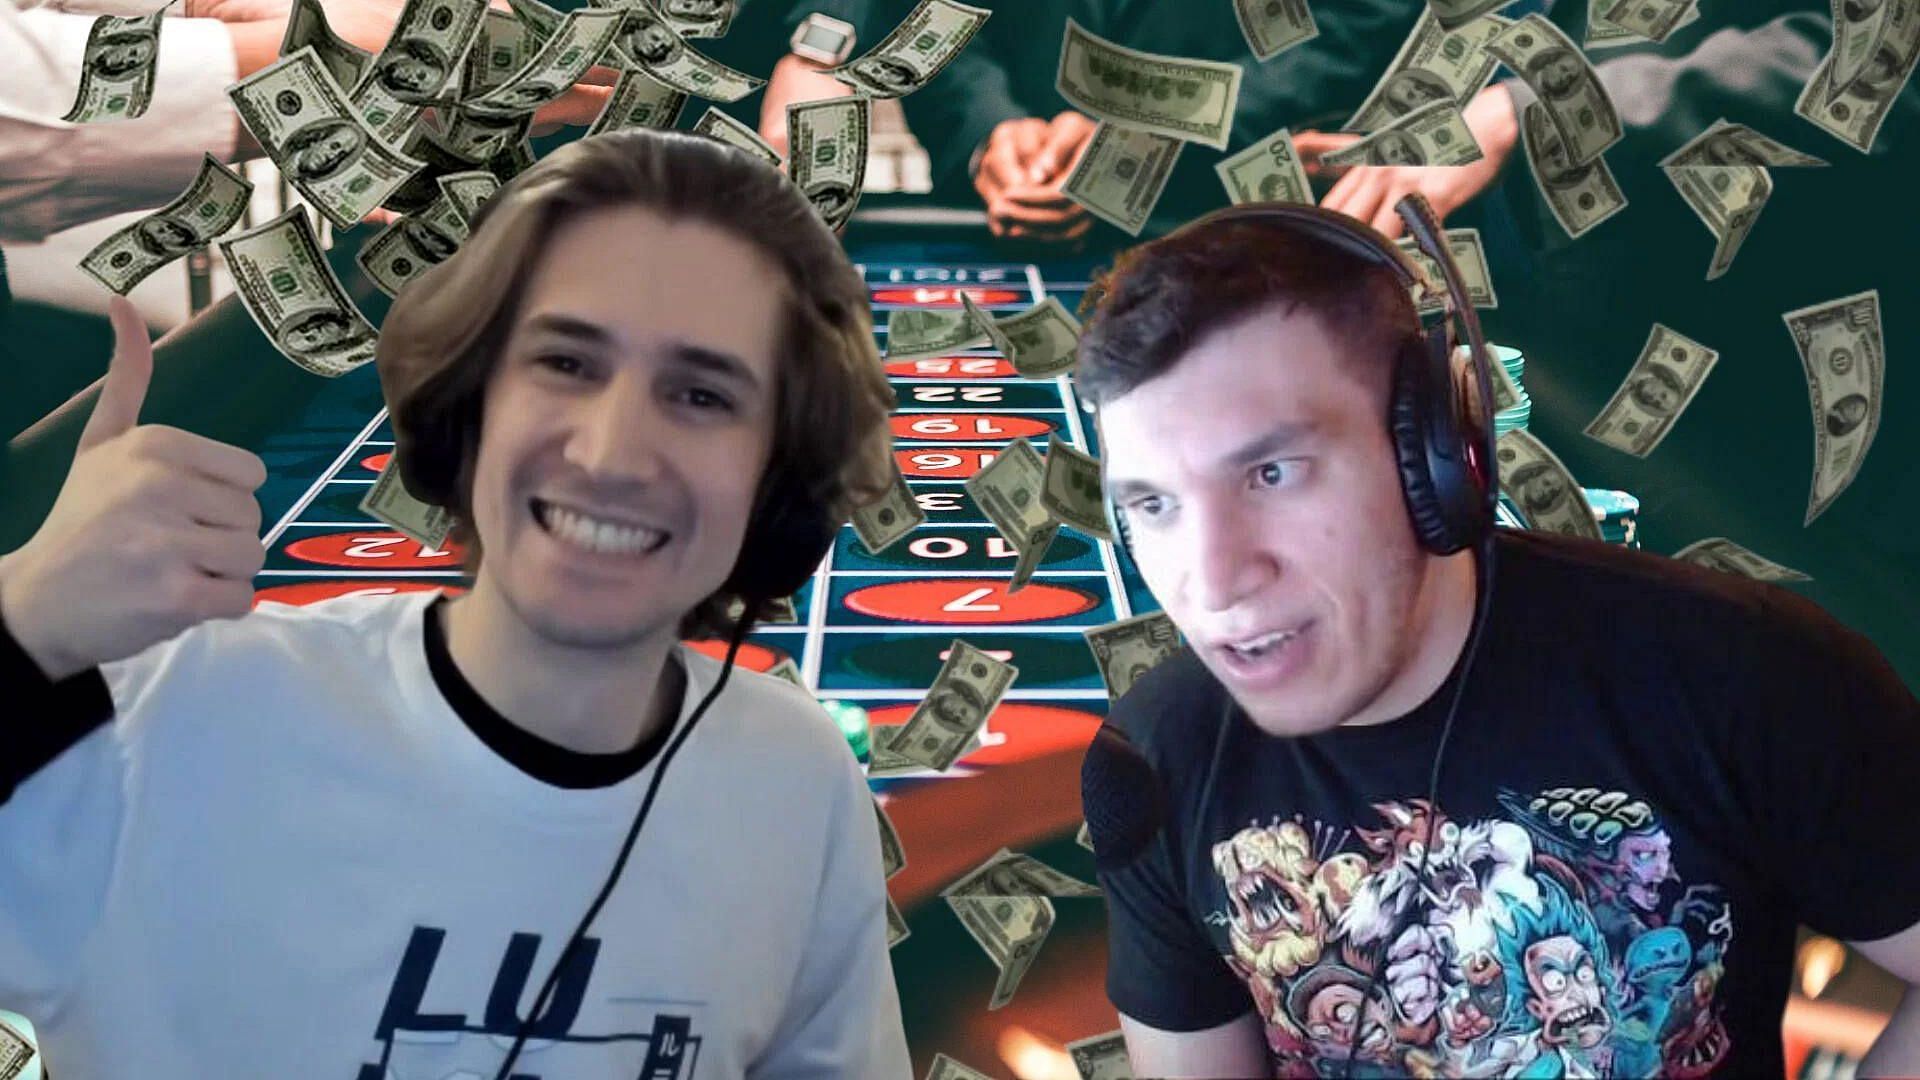 Popular streamers like Trainwrecks and xQc are taking gambling on Twitch to new heights. (Image via Sportskeeda)